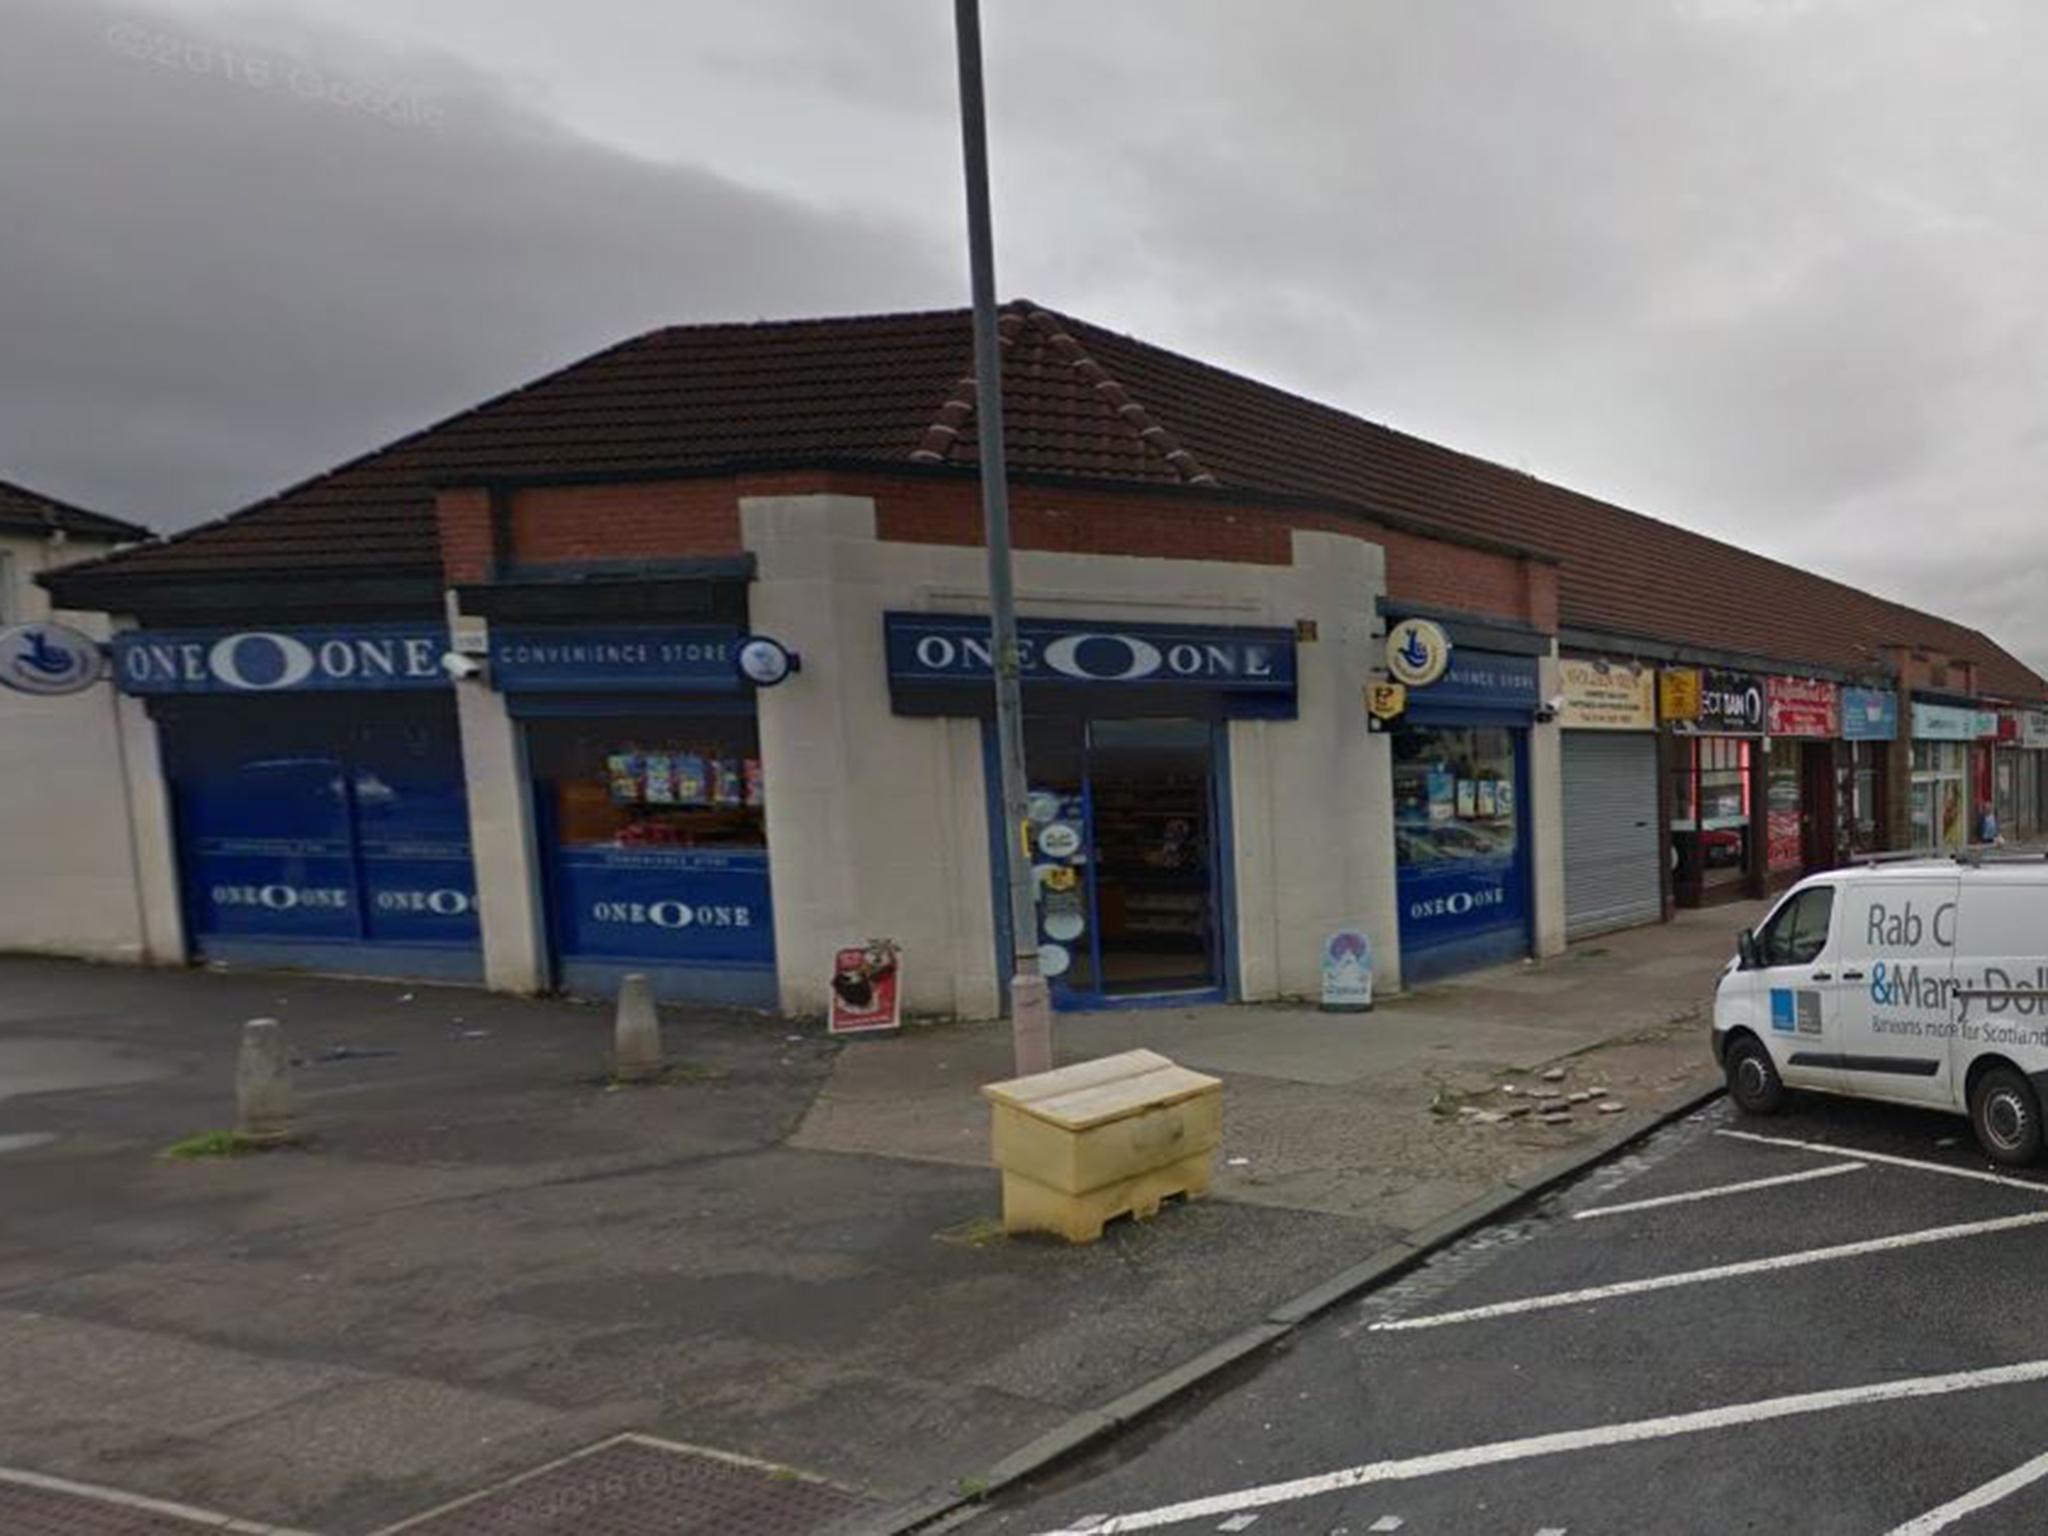 Hoggan ran away with two bottle of alcohol from the One O One shop in Dyke Road, Glasgow, after the shop assistant hit him with a mop